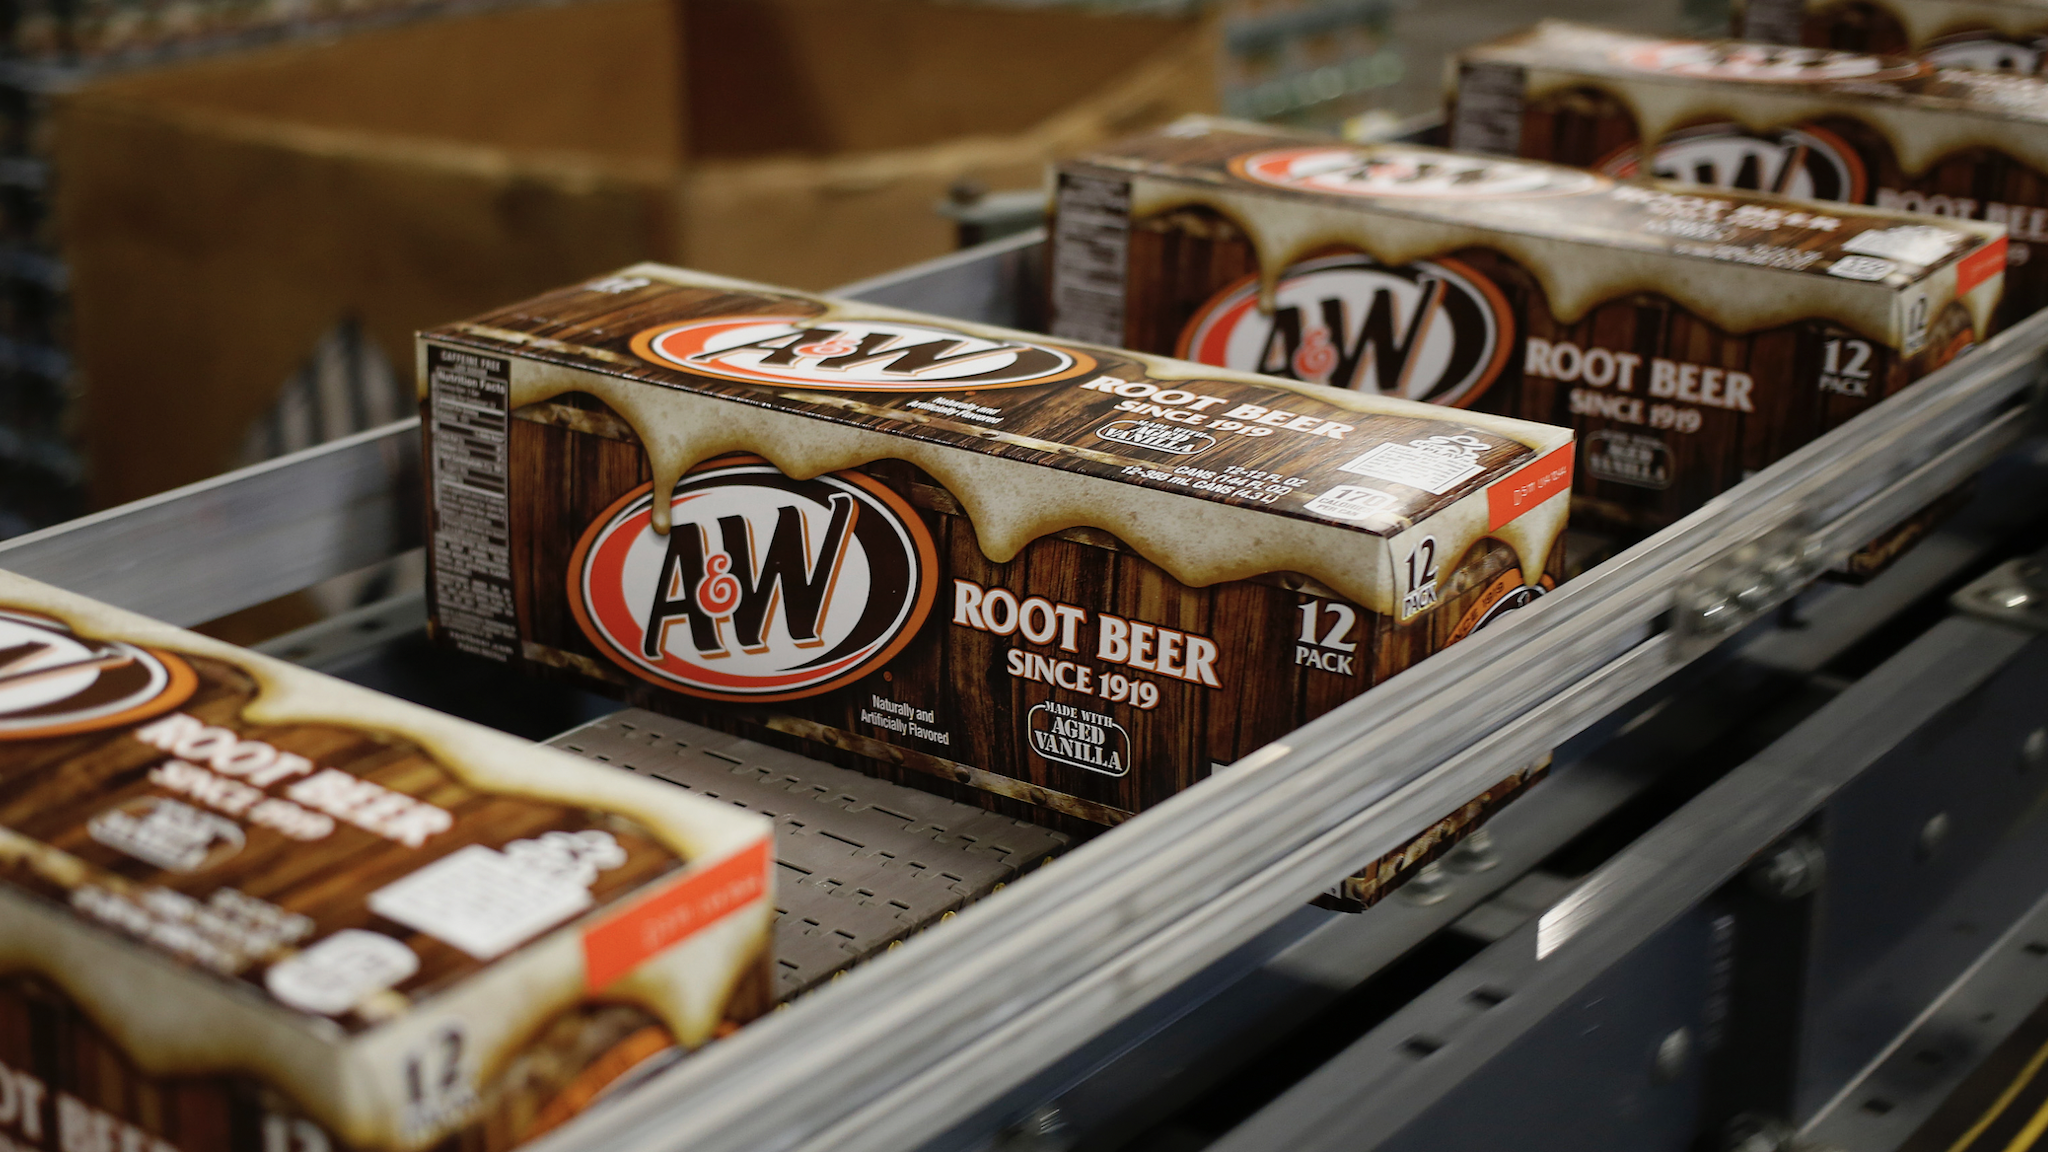 Cases of canned A&W Root Beer move down a conveyor belt after being filled at the Dr. Pepper Snapple Group Inc. bottling plant in Louisville, Kentucky, U.S., on Tuesday, April 21, 2015. Dr. Pepper Snapple Group Inc., producers of 7up and A&W Root Beer, is scheduled to release earnings figures on April 23.